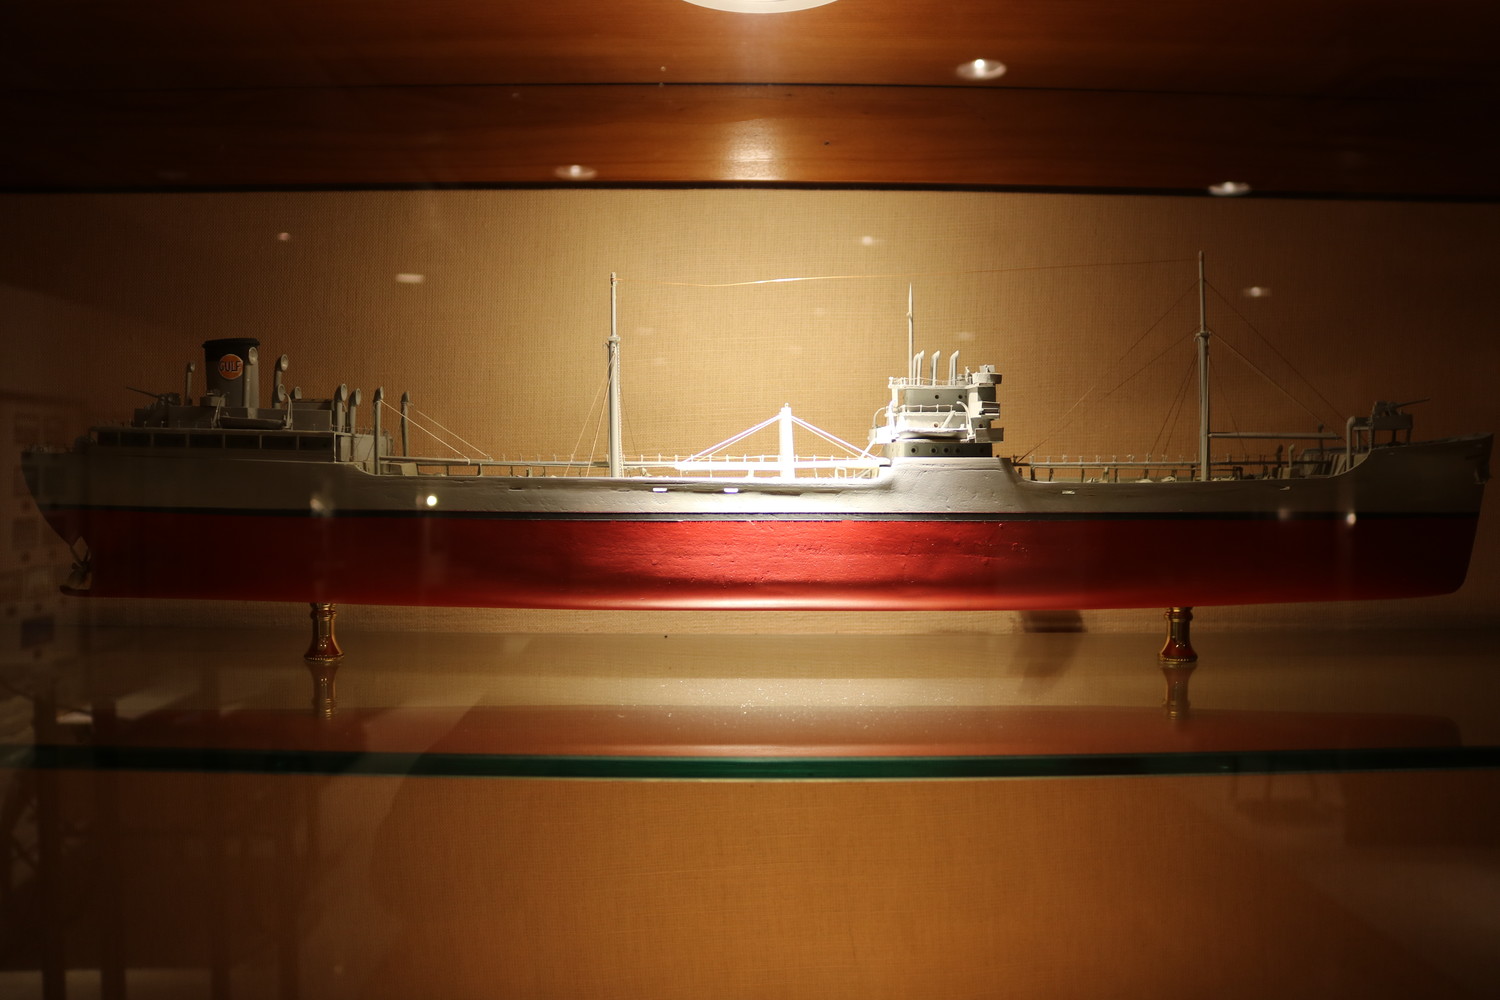 A model of the SS Gulf America on display at the Ponte Vedra Inn & Club.